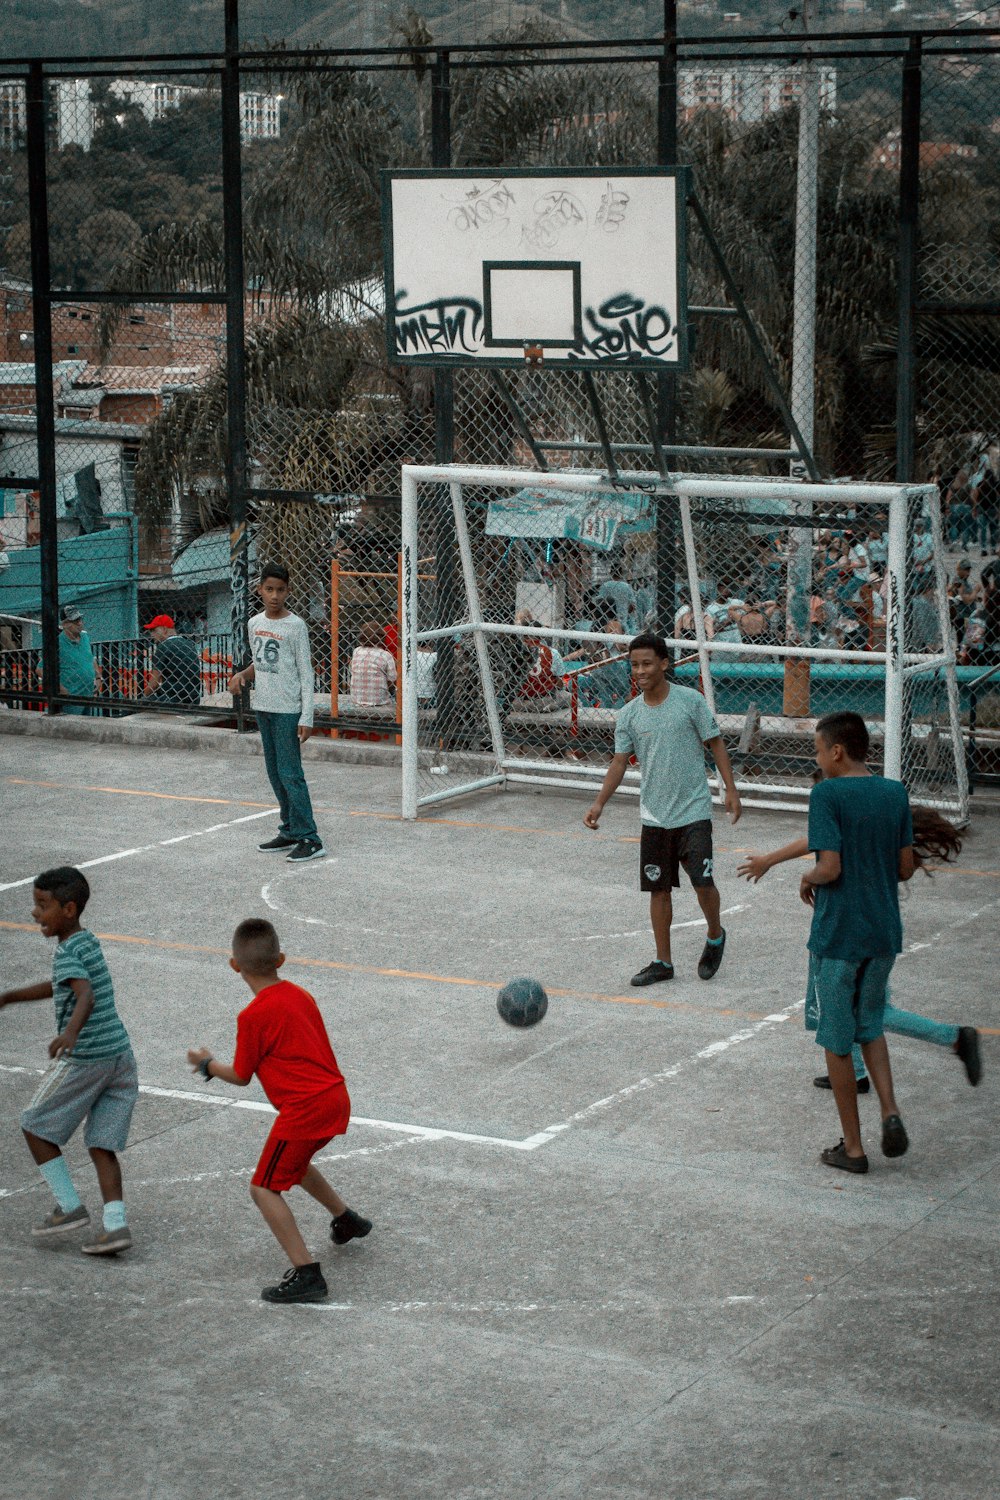 group of people playing basketball during daytime